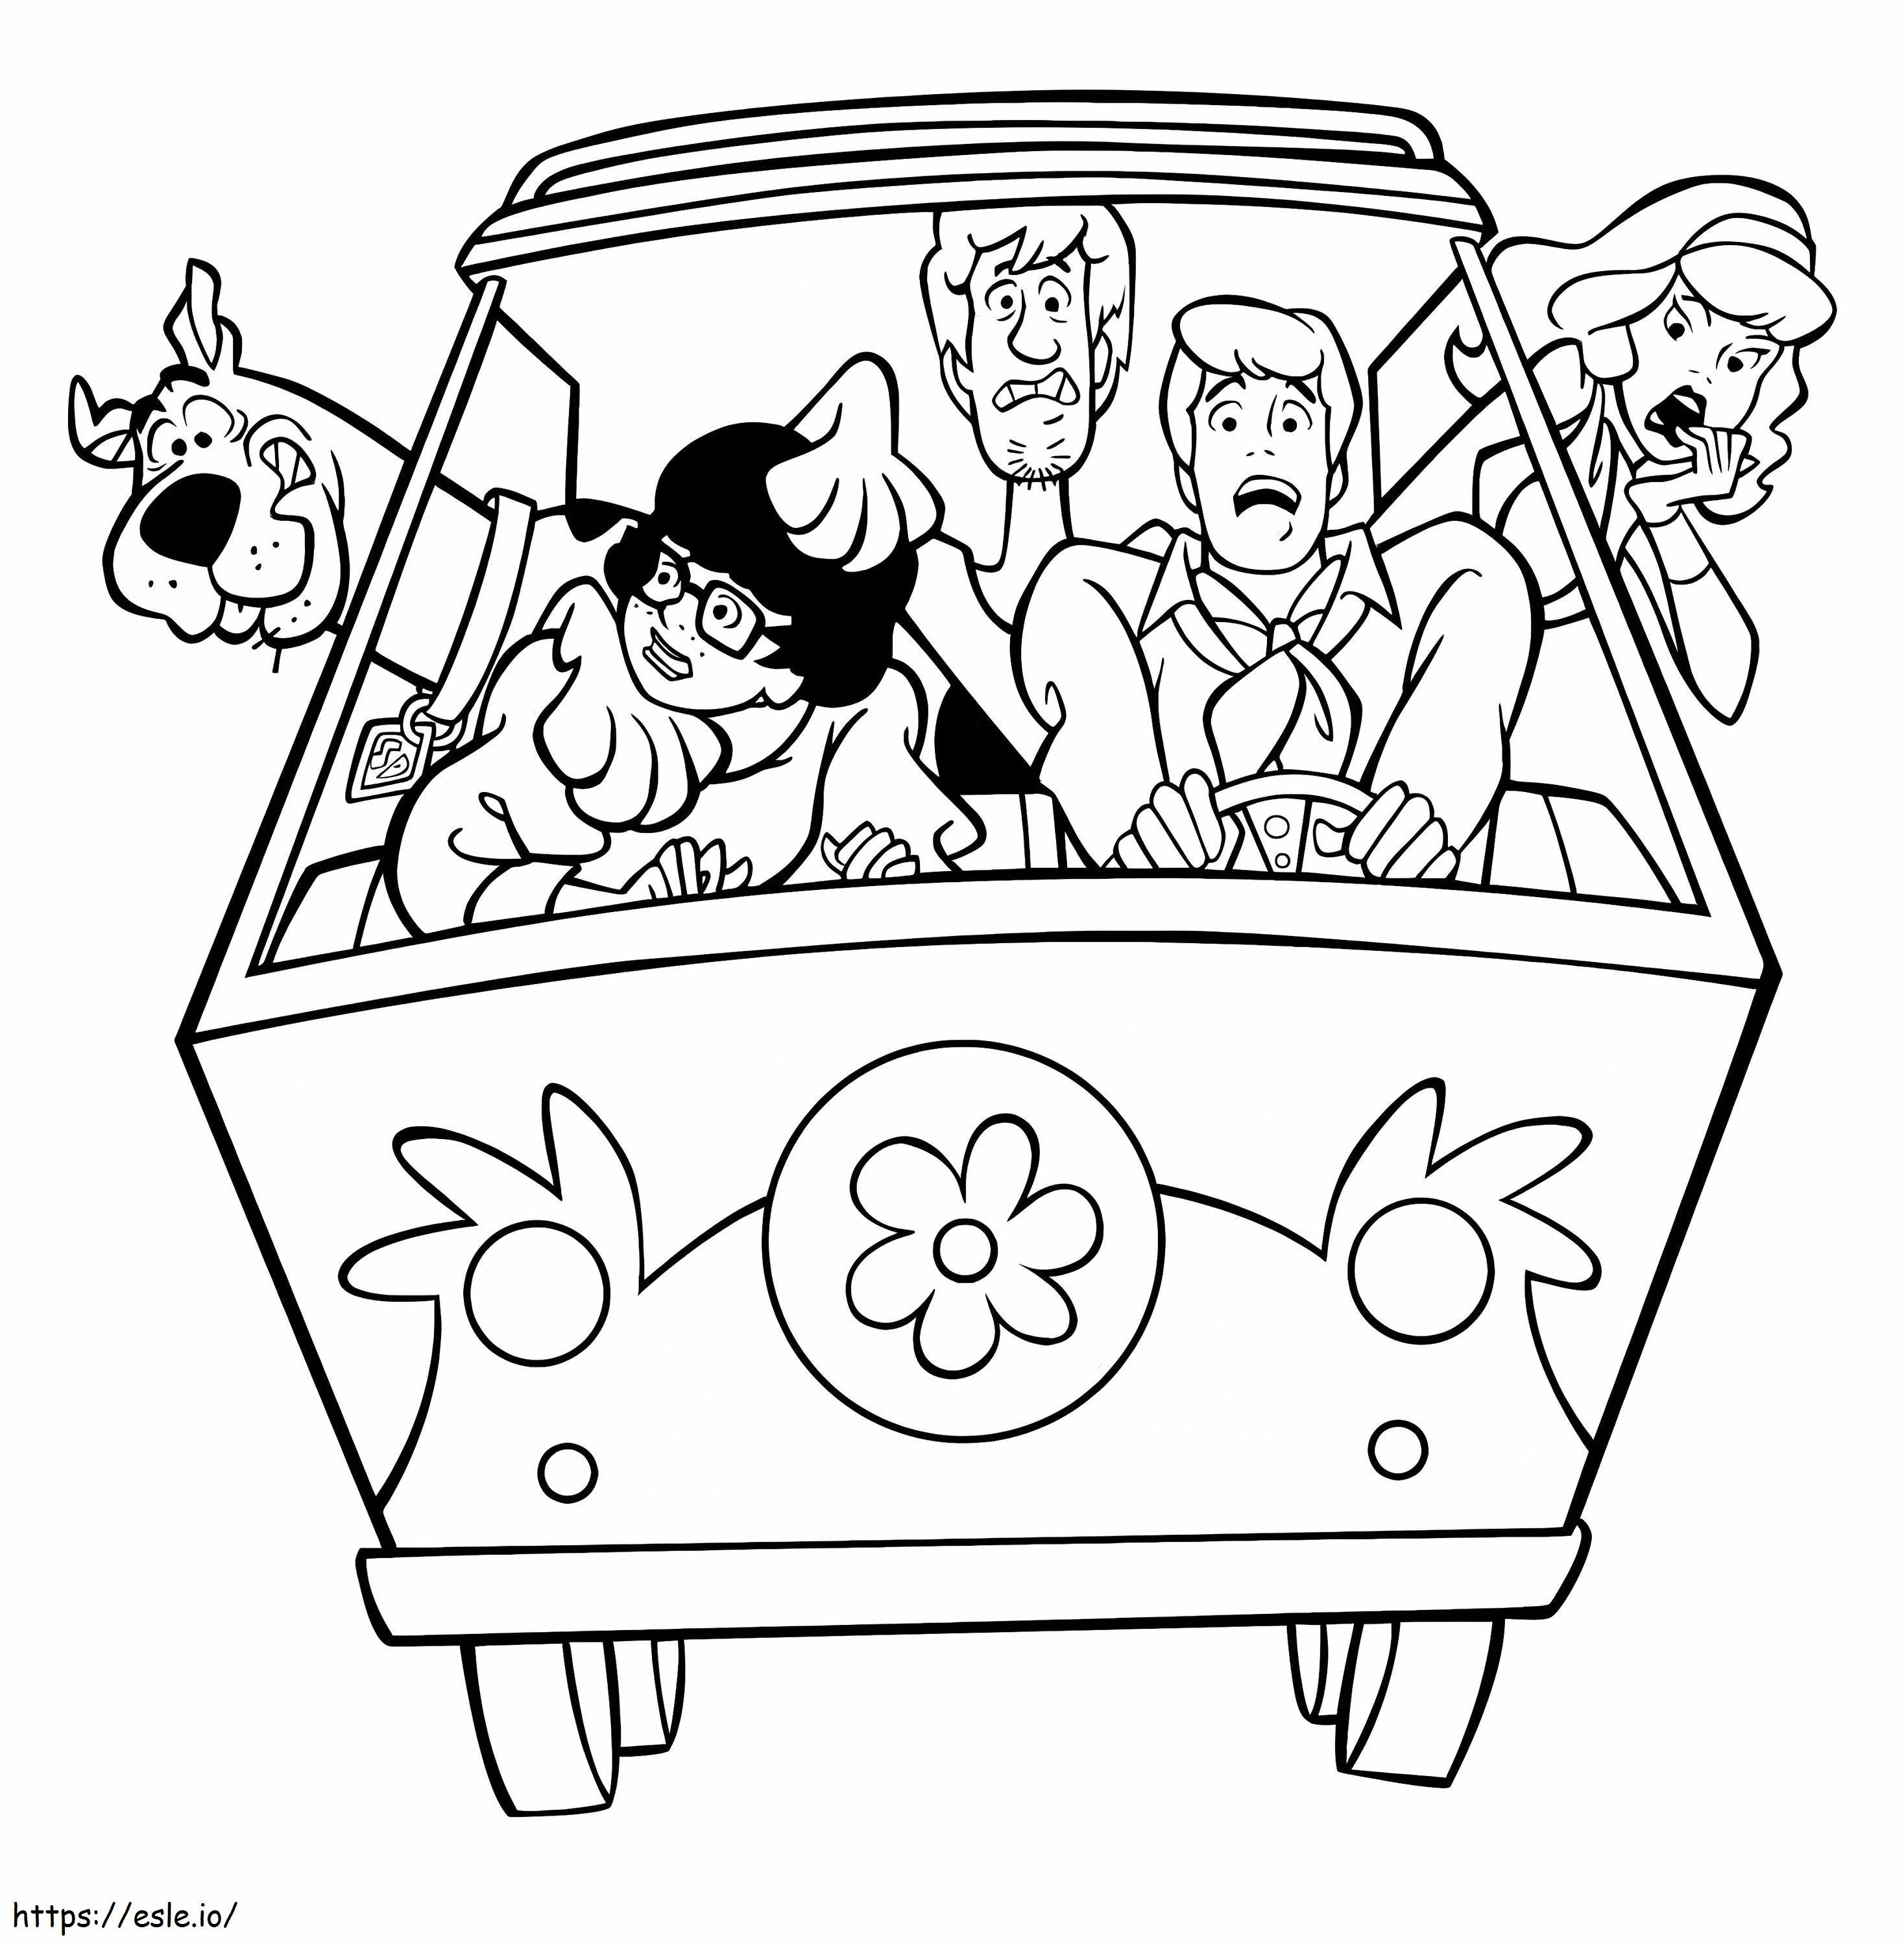 Shaggy And Scooby Doo Scared coloring page